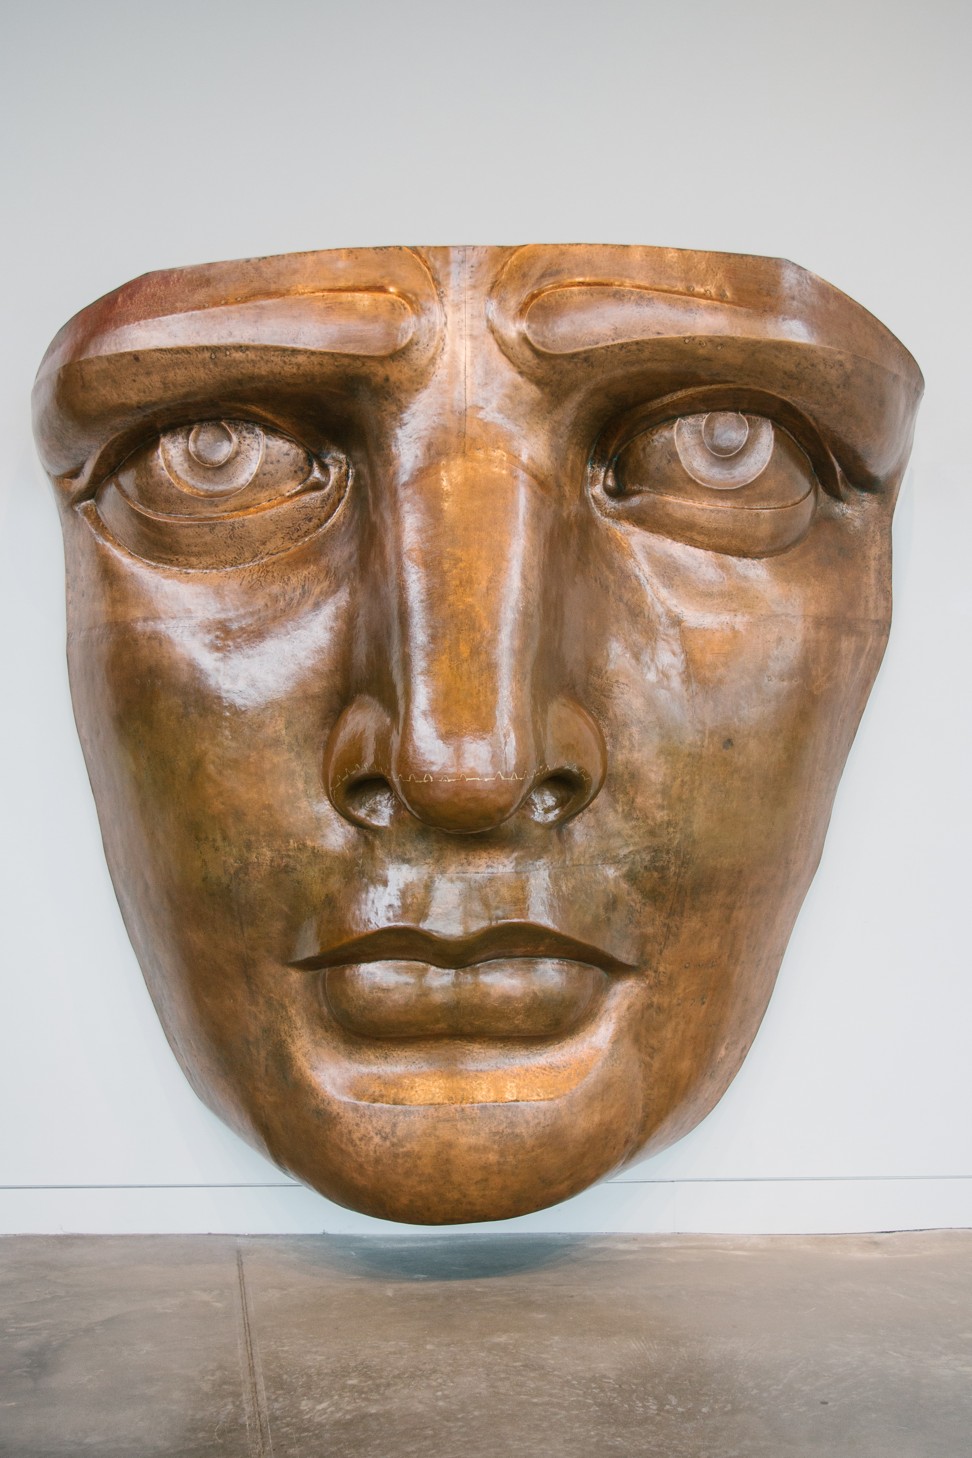 A model of the statue’s face on display in the Statue of Liberty Museum. Photo: EPA